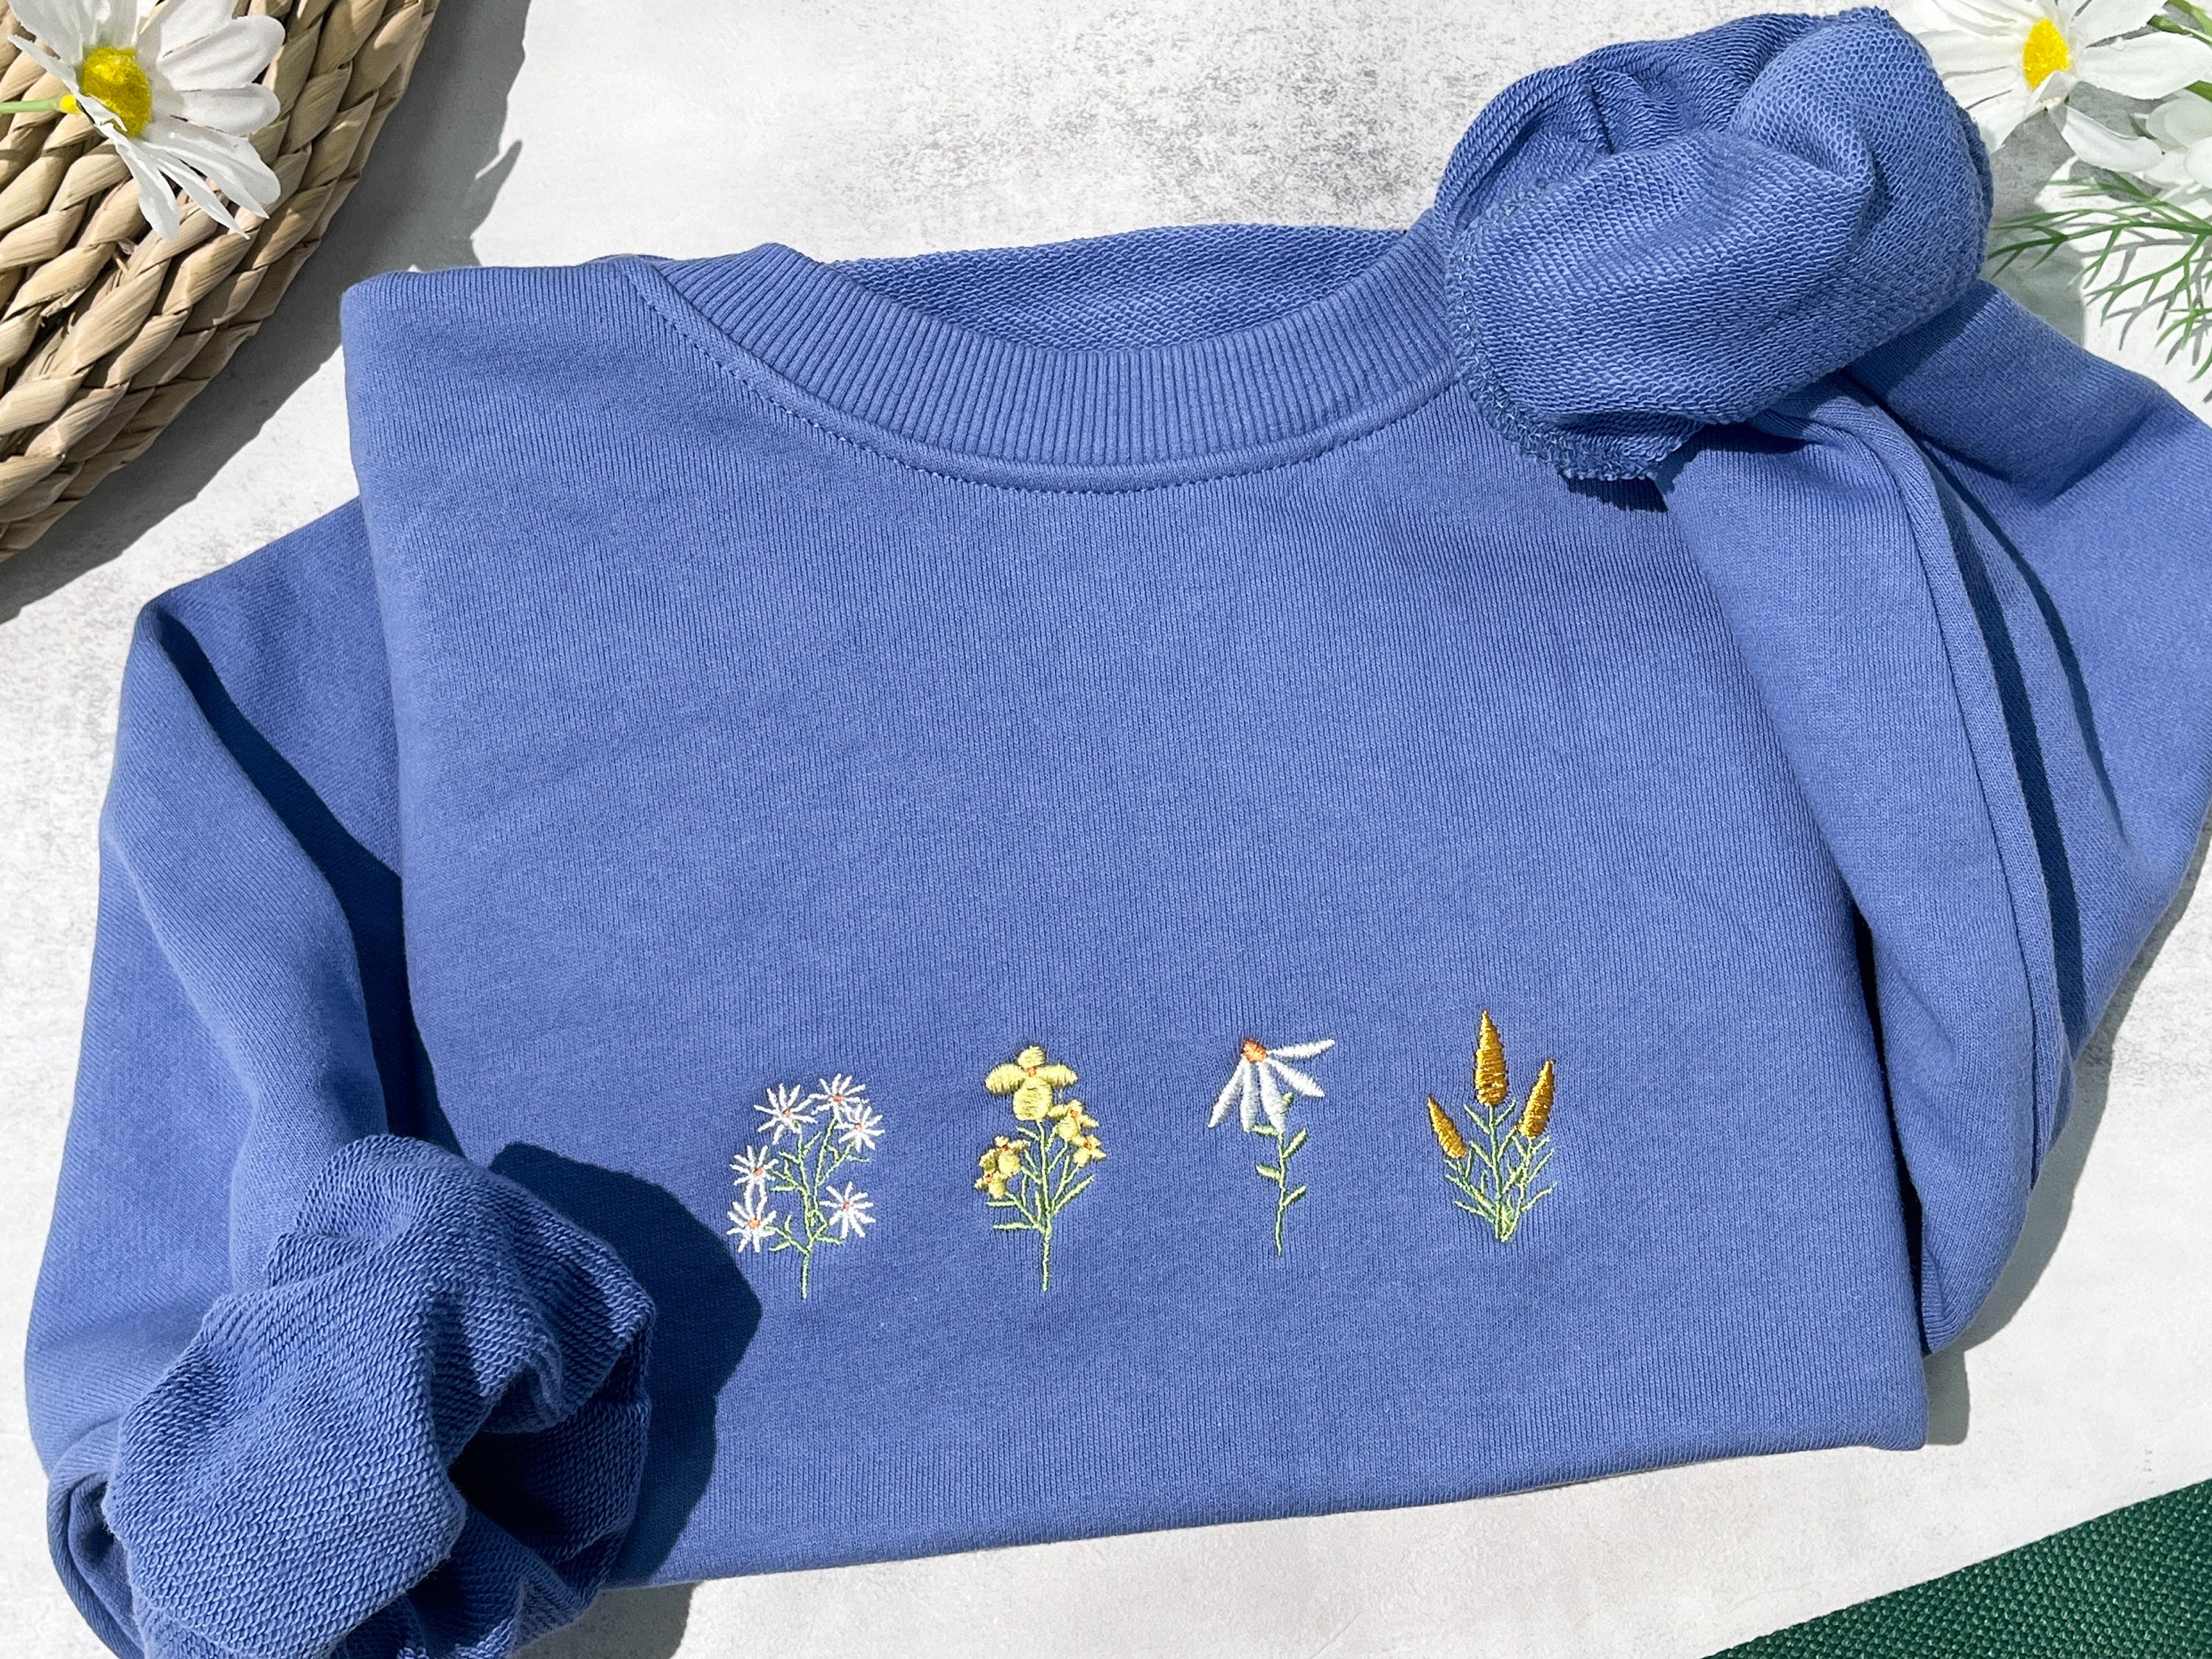 Discover Daisy sweatshirt embroidered,embroidered sweatshirt